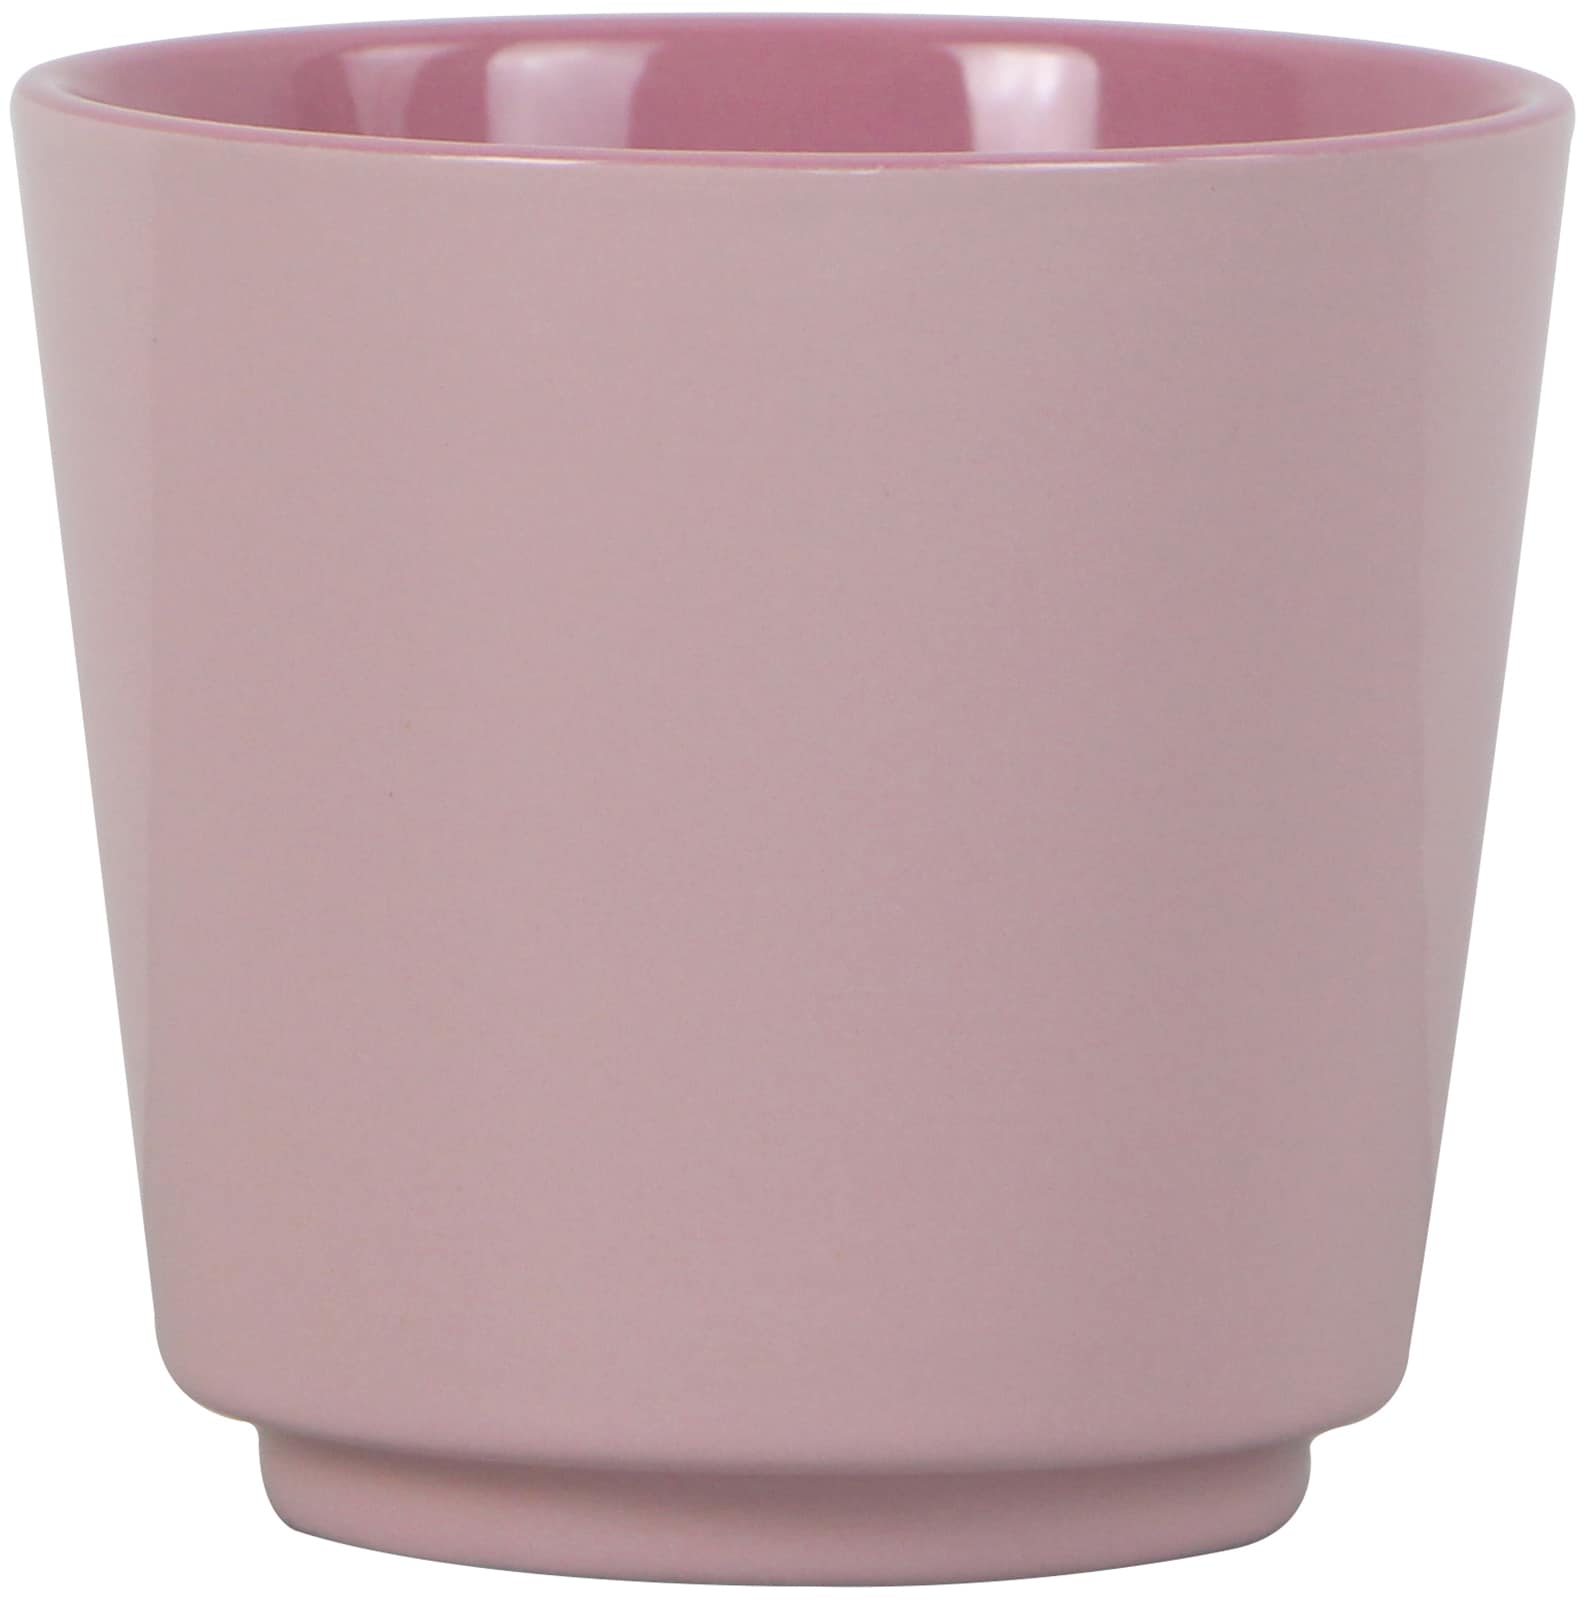 Pink & Planters Ceramic W 4.13-in Planter roth Pots Indoor allen H at department x the 3.74-in + in